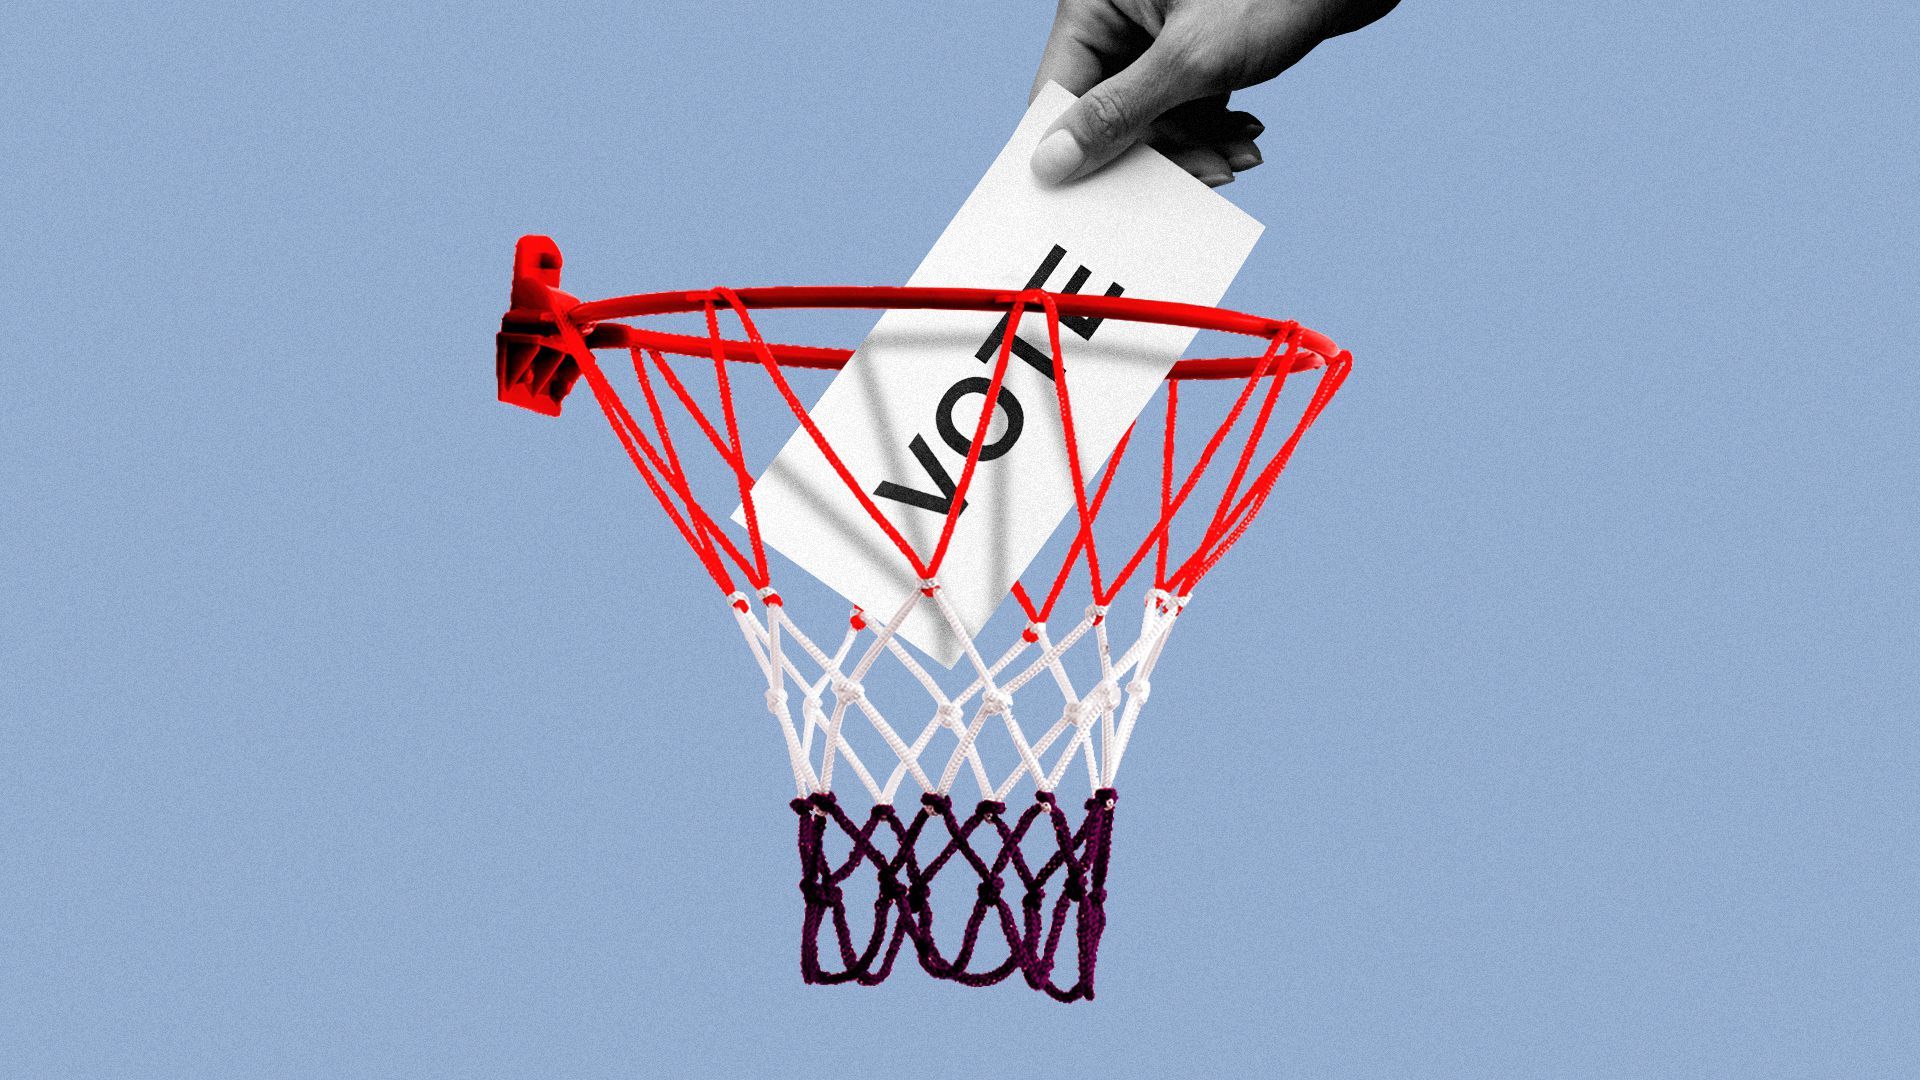 Illustration of a person dropping a voter ballot into a basketball hoop